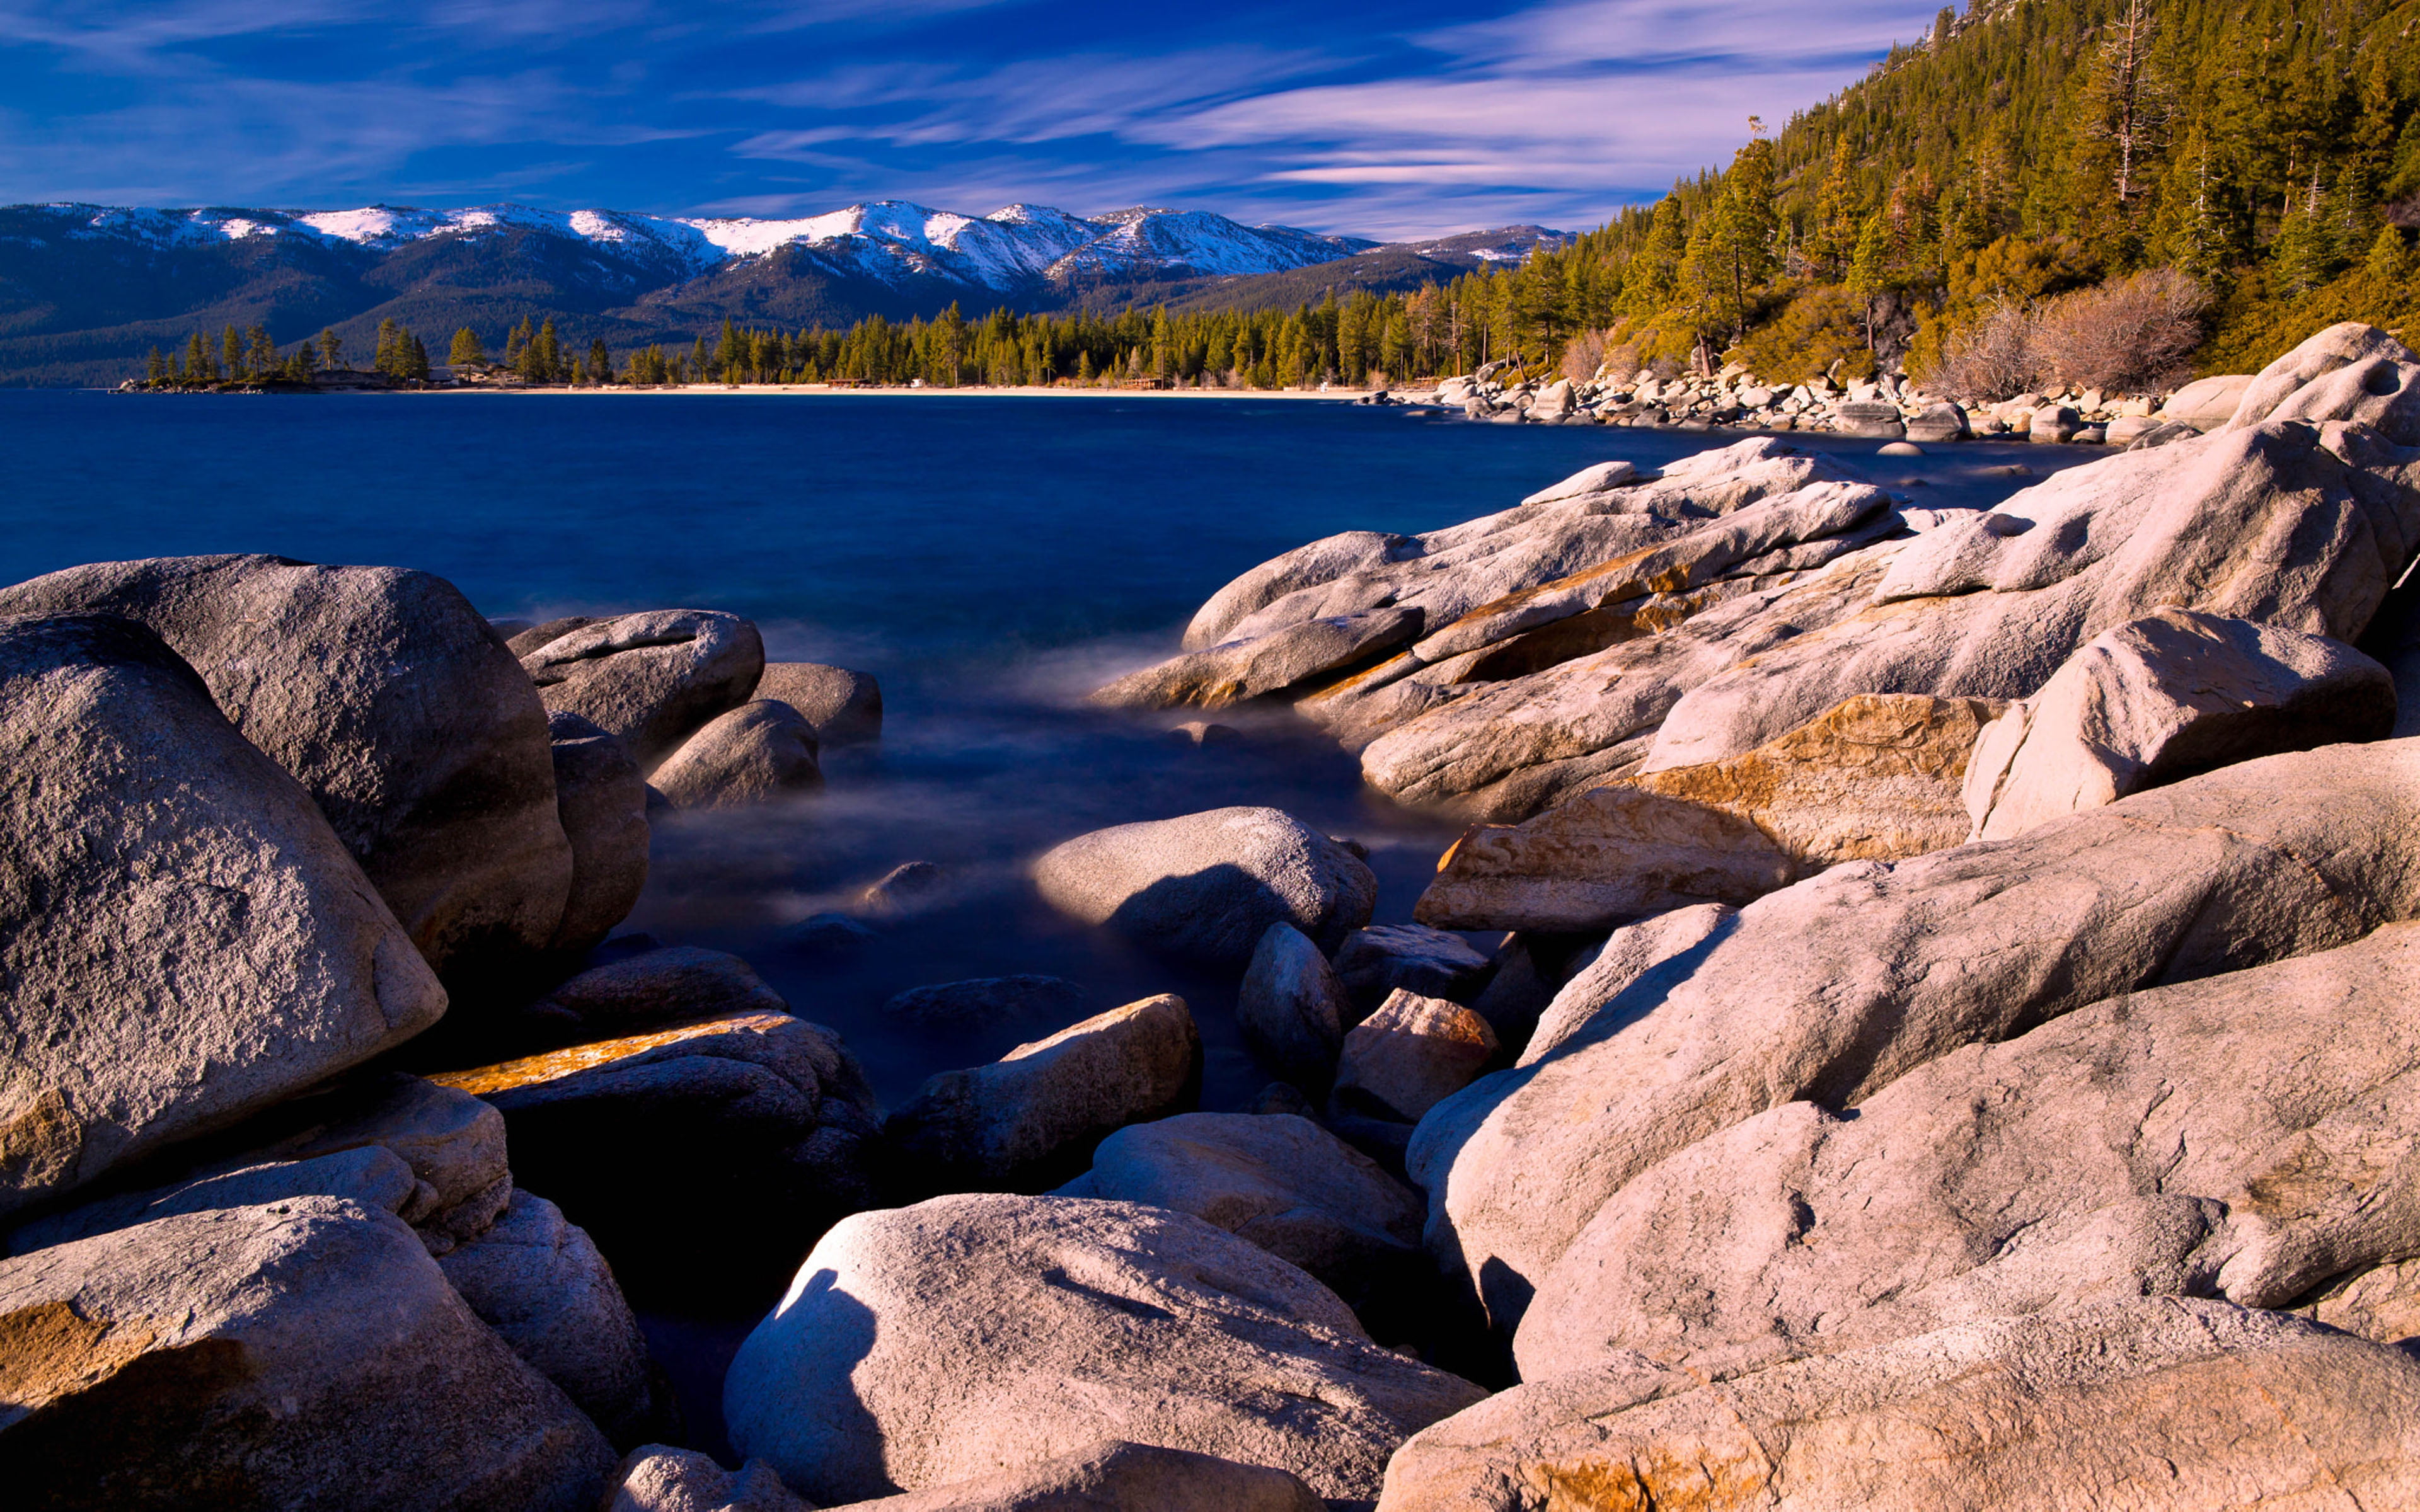 Lake Tahoe In The California And Nevada United States Desktop Hd Wallpaper For Mobile Phones Tablet And Pc 3840×2400